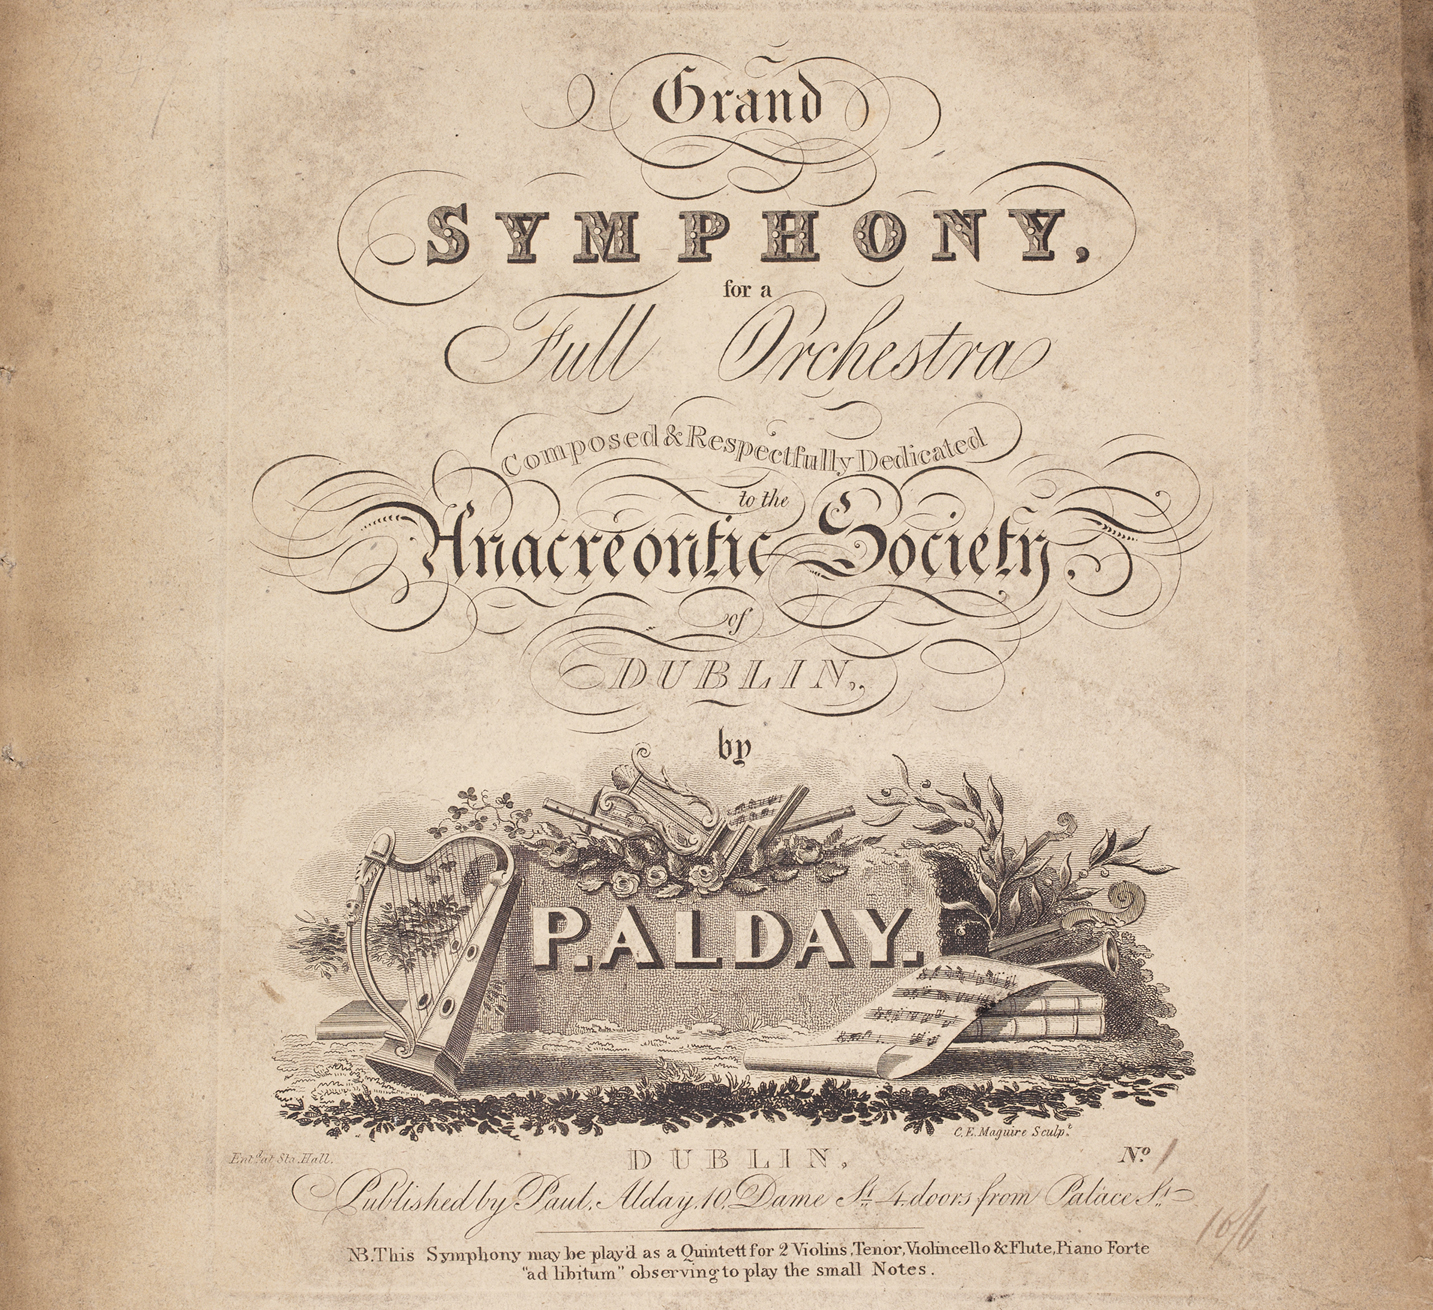 Discovery of Ireland&#039;s First Symphony Inspires Dublin Symposium